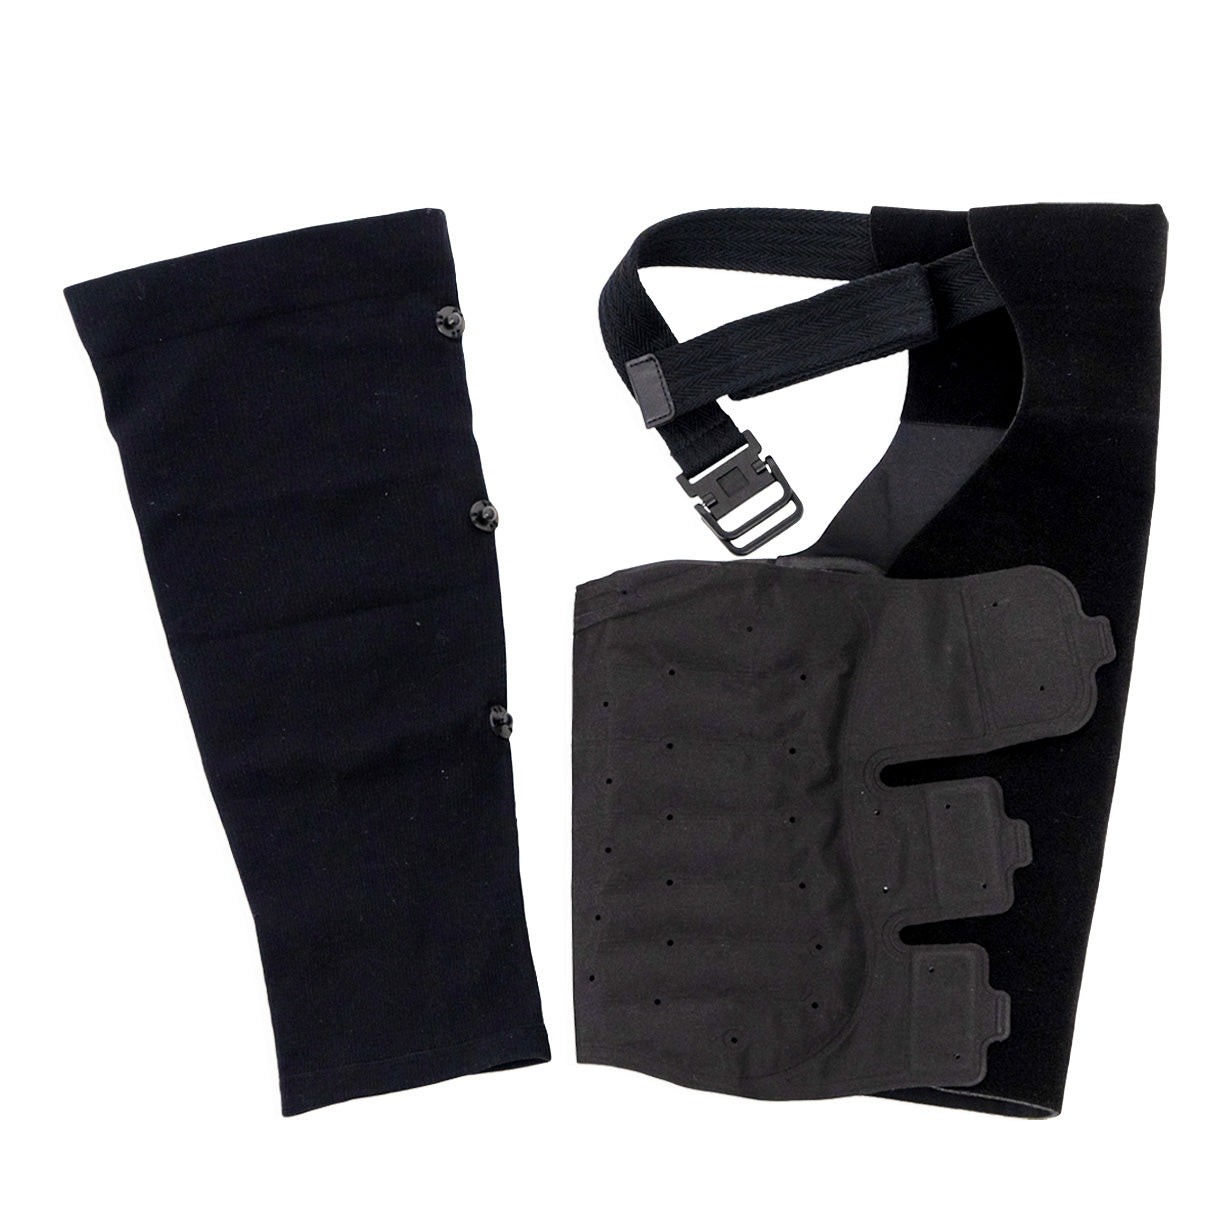 aero-wrap thigh inflatable sleeve and liner side by side for comfortable fit on swollen legs